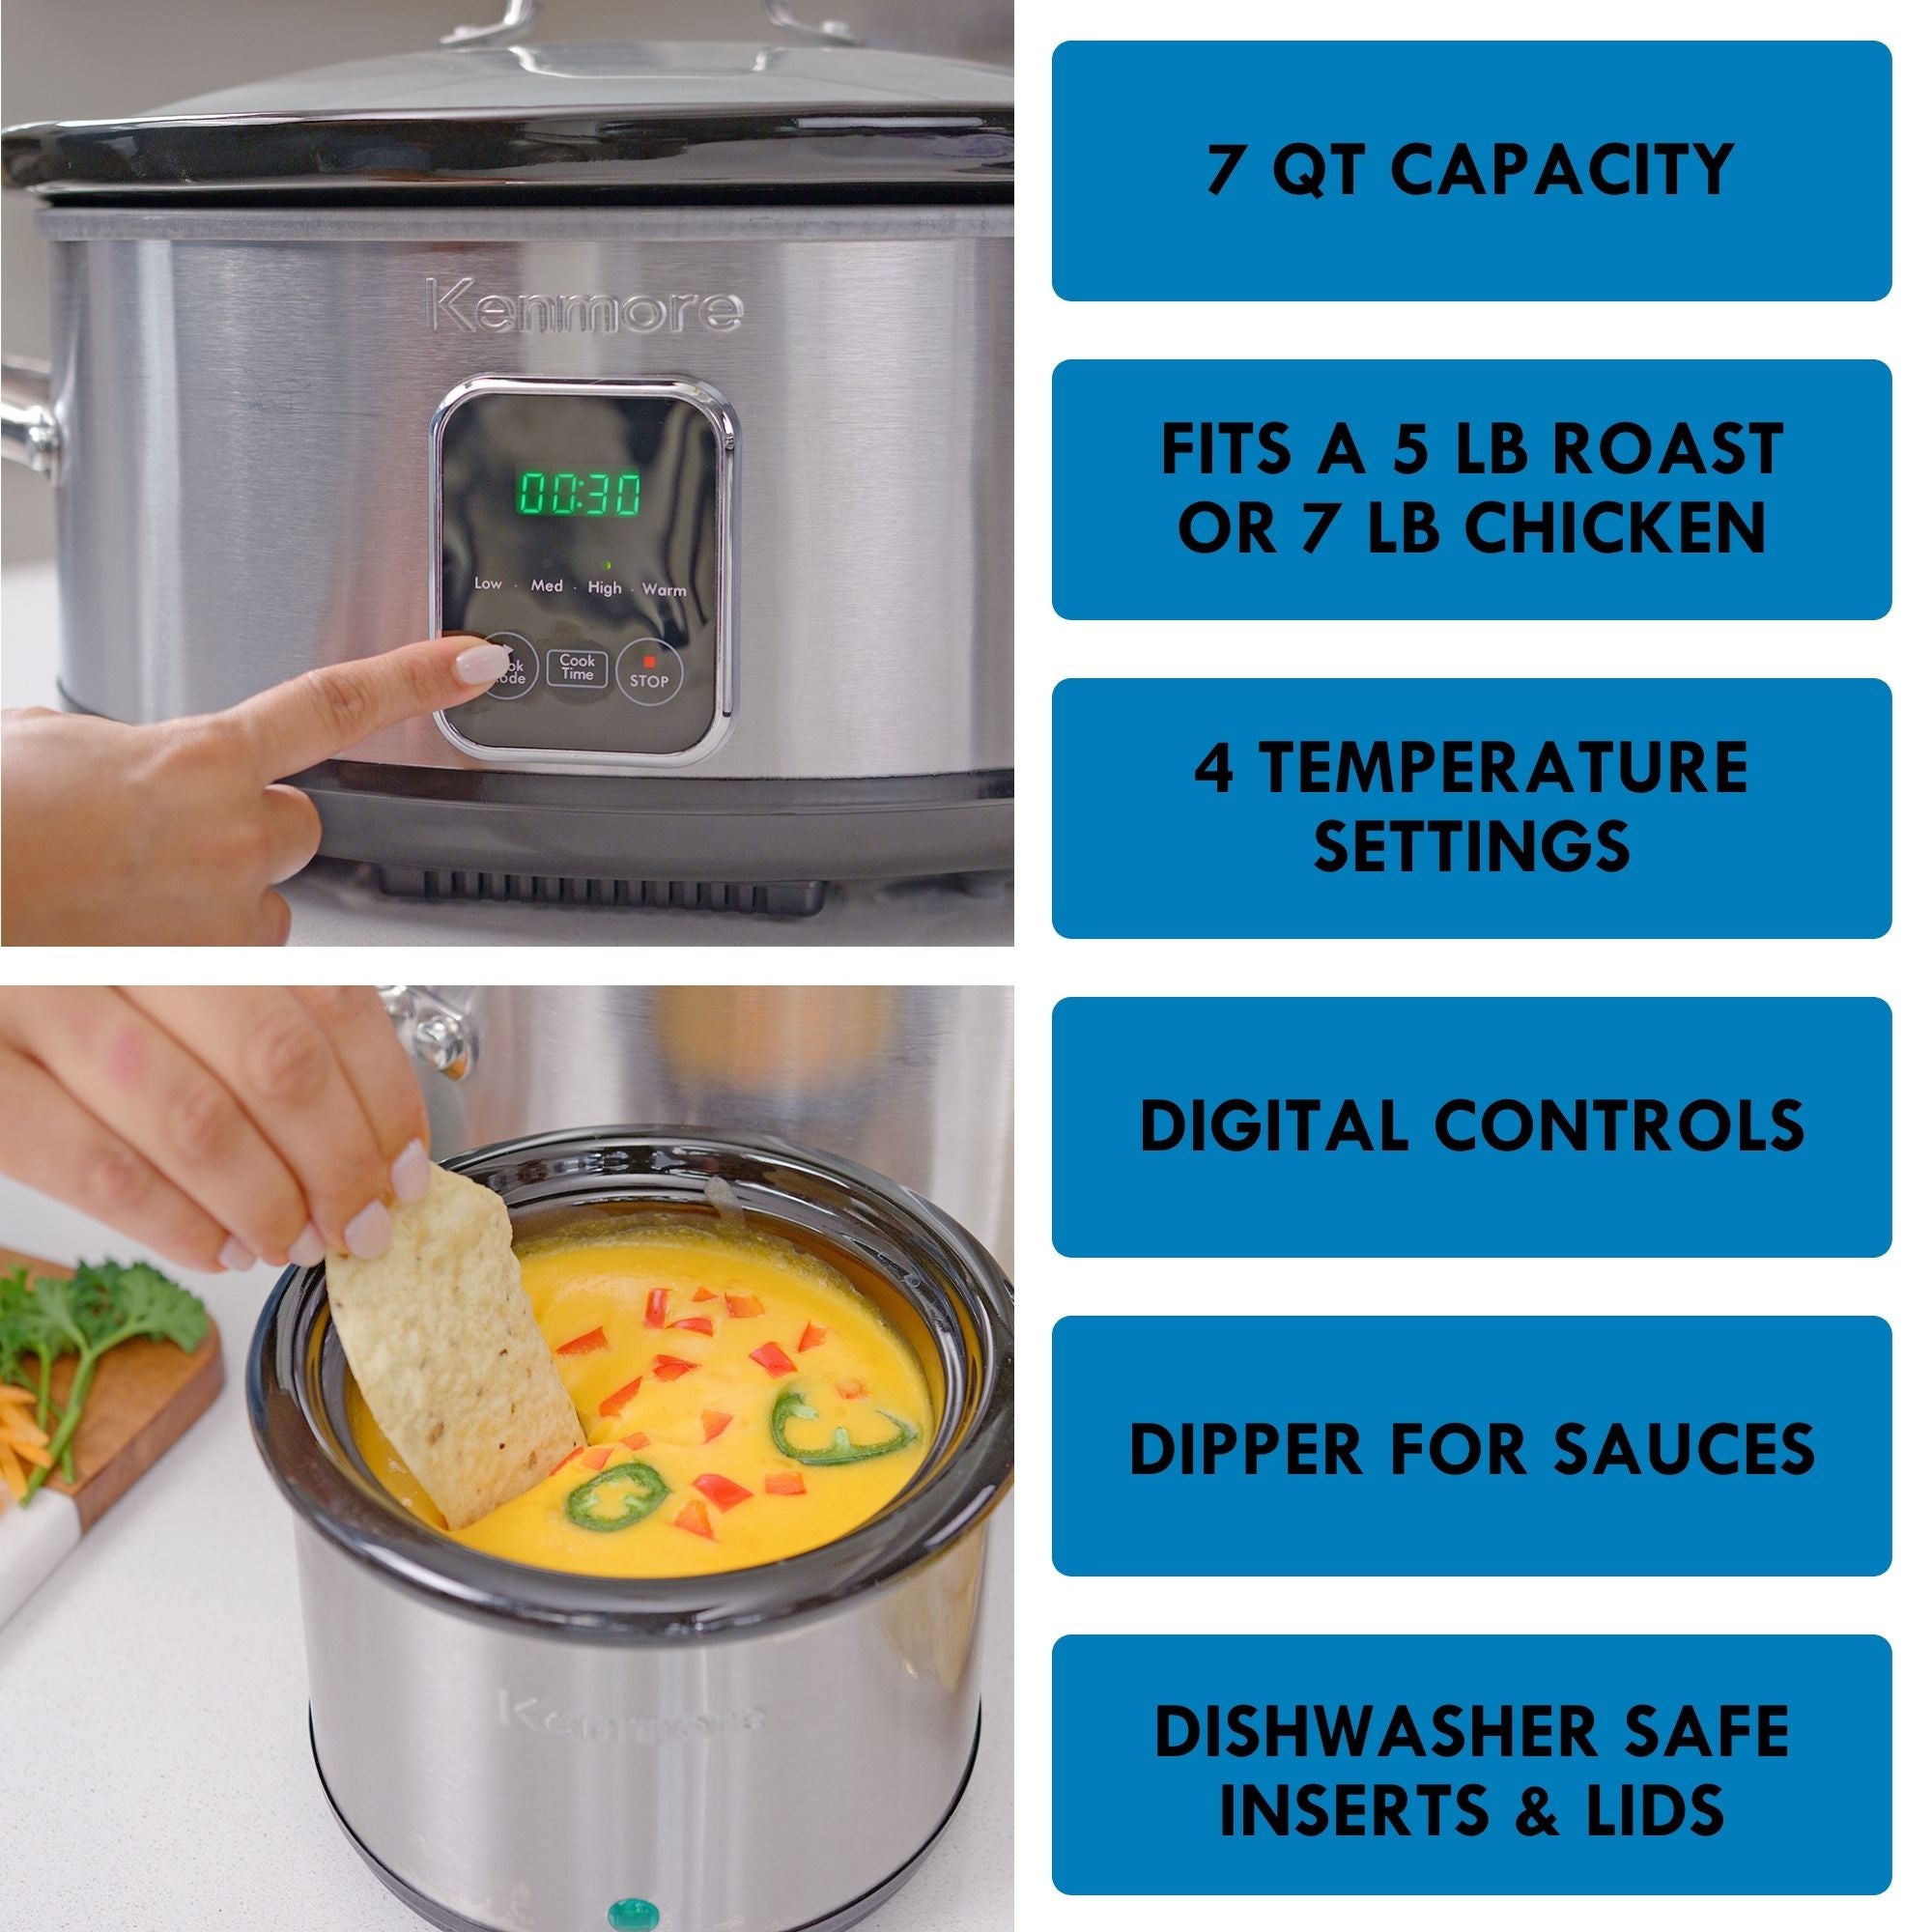 Two pictures show a person's finger pressing a button on the control panel of the Kenmore 7 qt programmable slow cooker (top) and a person's hand dipping a tortilla chip in queso sauce in the dipper (bottom) with features listed to the right: 7-qt capacity; Fits a 7 lb chicken or 5 lb roast; 4 temperature settings; digital controls; dipper for sauces; dishwasher-safe inserts and lids